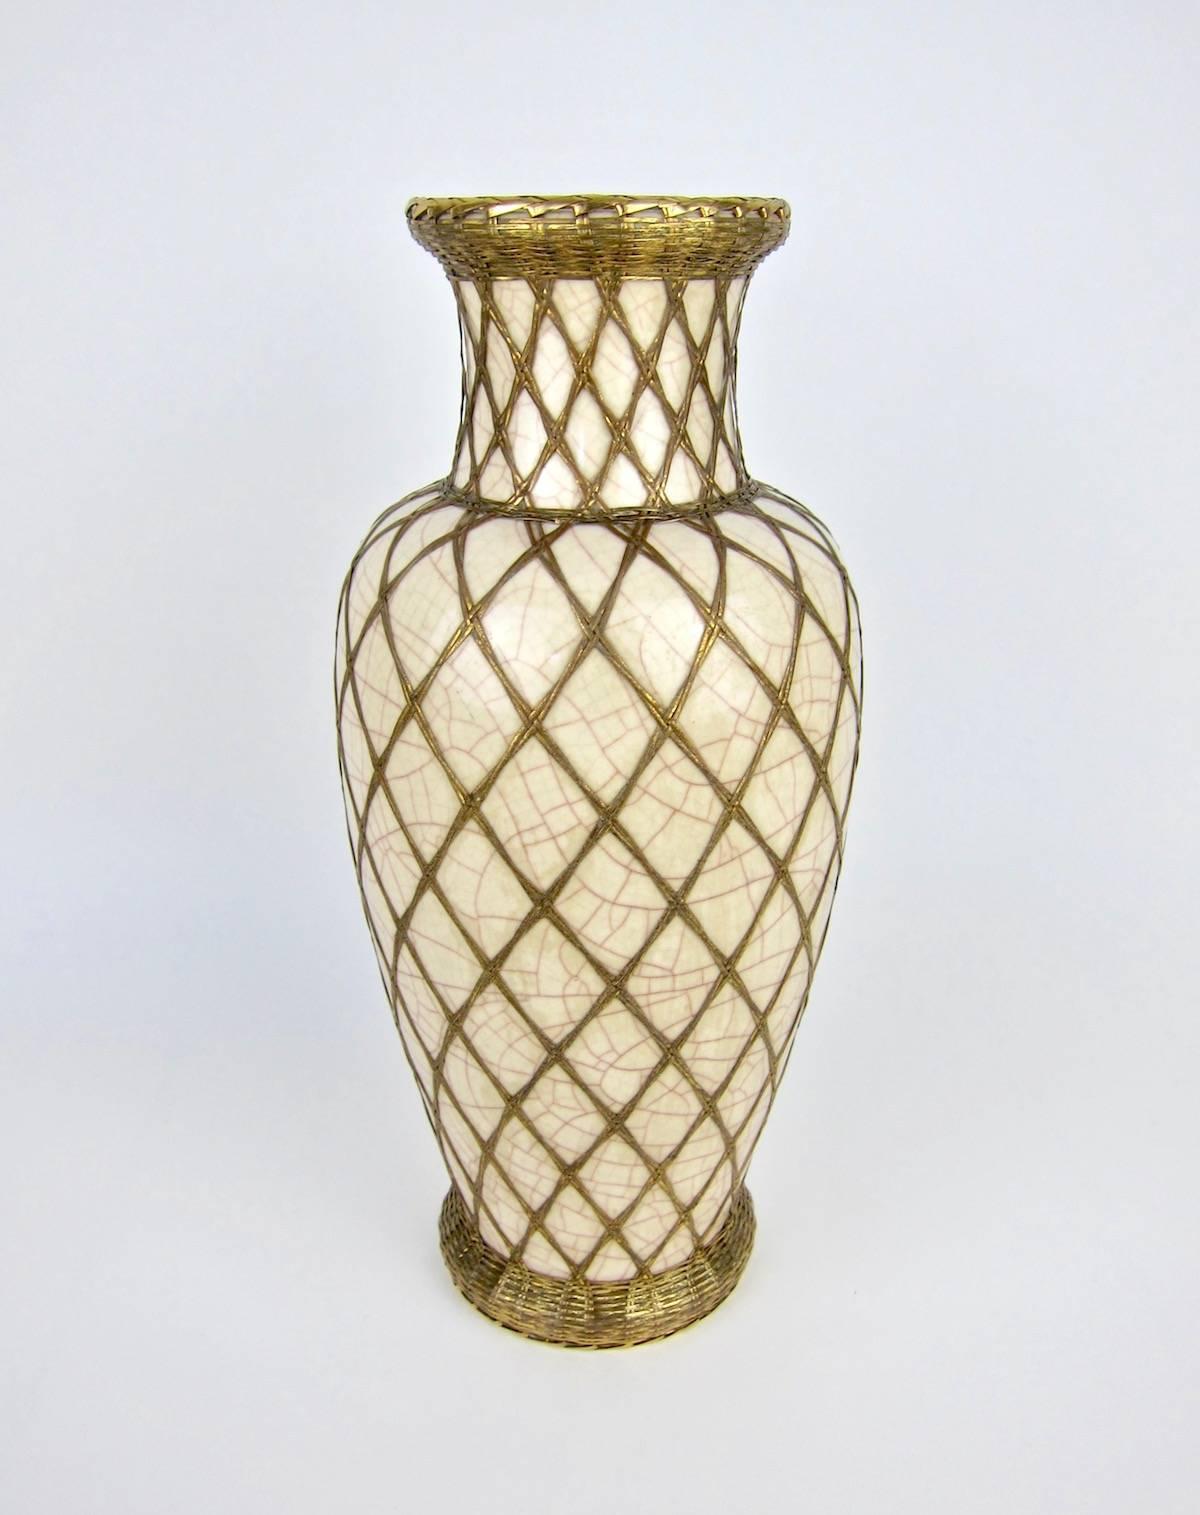 A large glazed art pottery vase, likely from a Japanese Awaji workshop studio, dating to the early 20th century. The vessel is glazed in ivory with an intentional craquelure pattern creating a network of contrasting red lines over the glazed